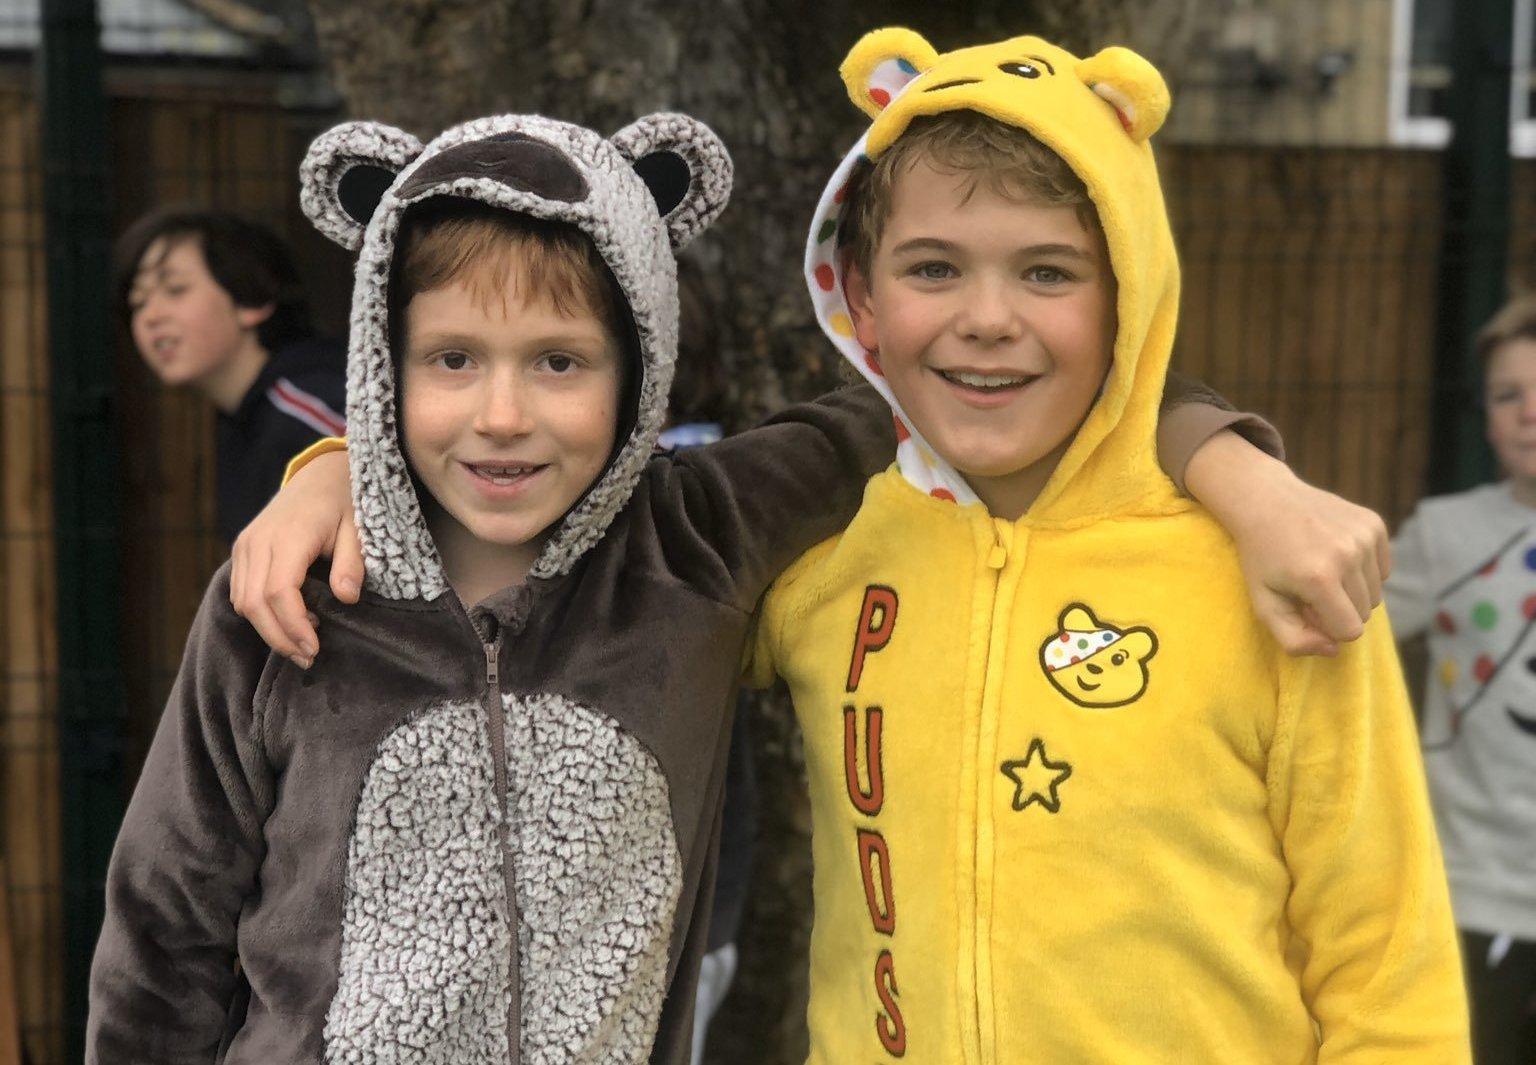 Students at Our Lady of Sion Junior School in Worthing ran bake sales and home clothes sales for Children in Need